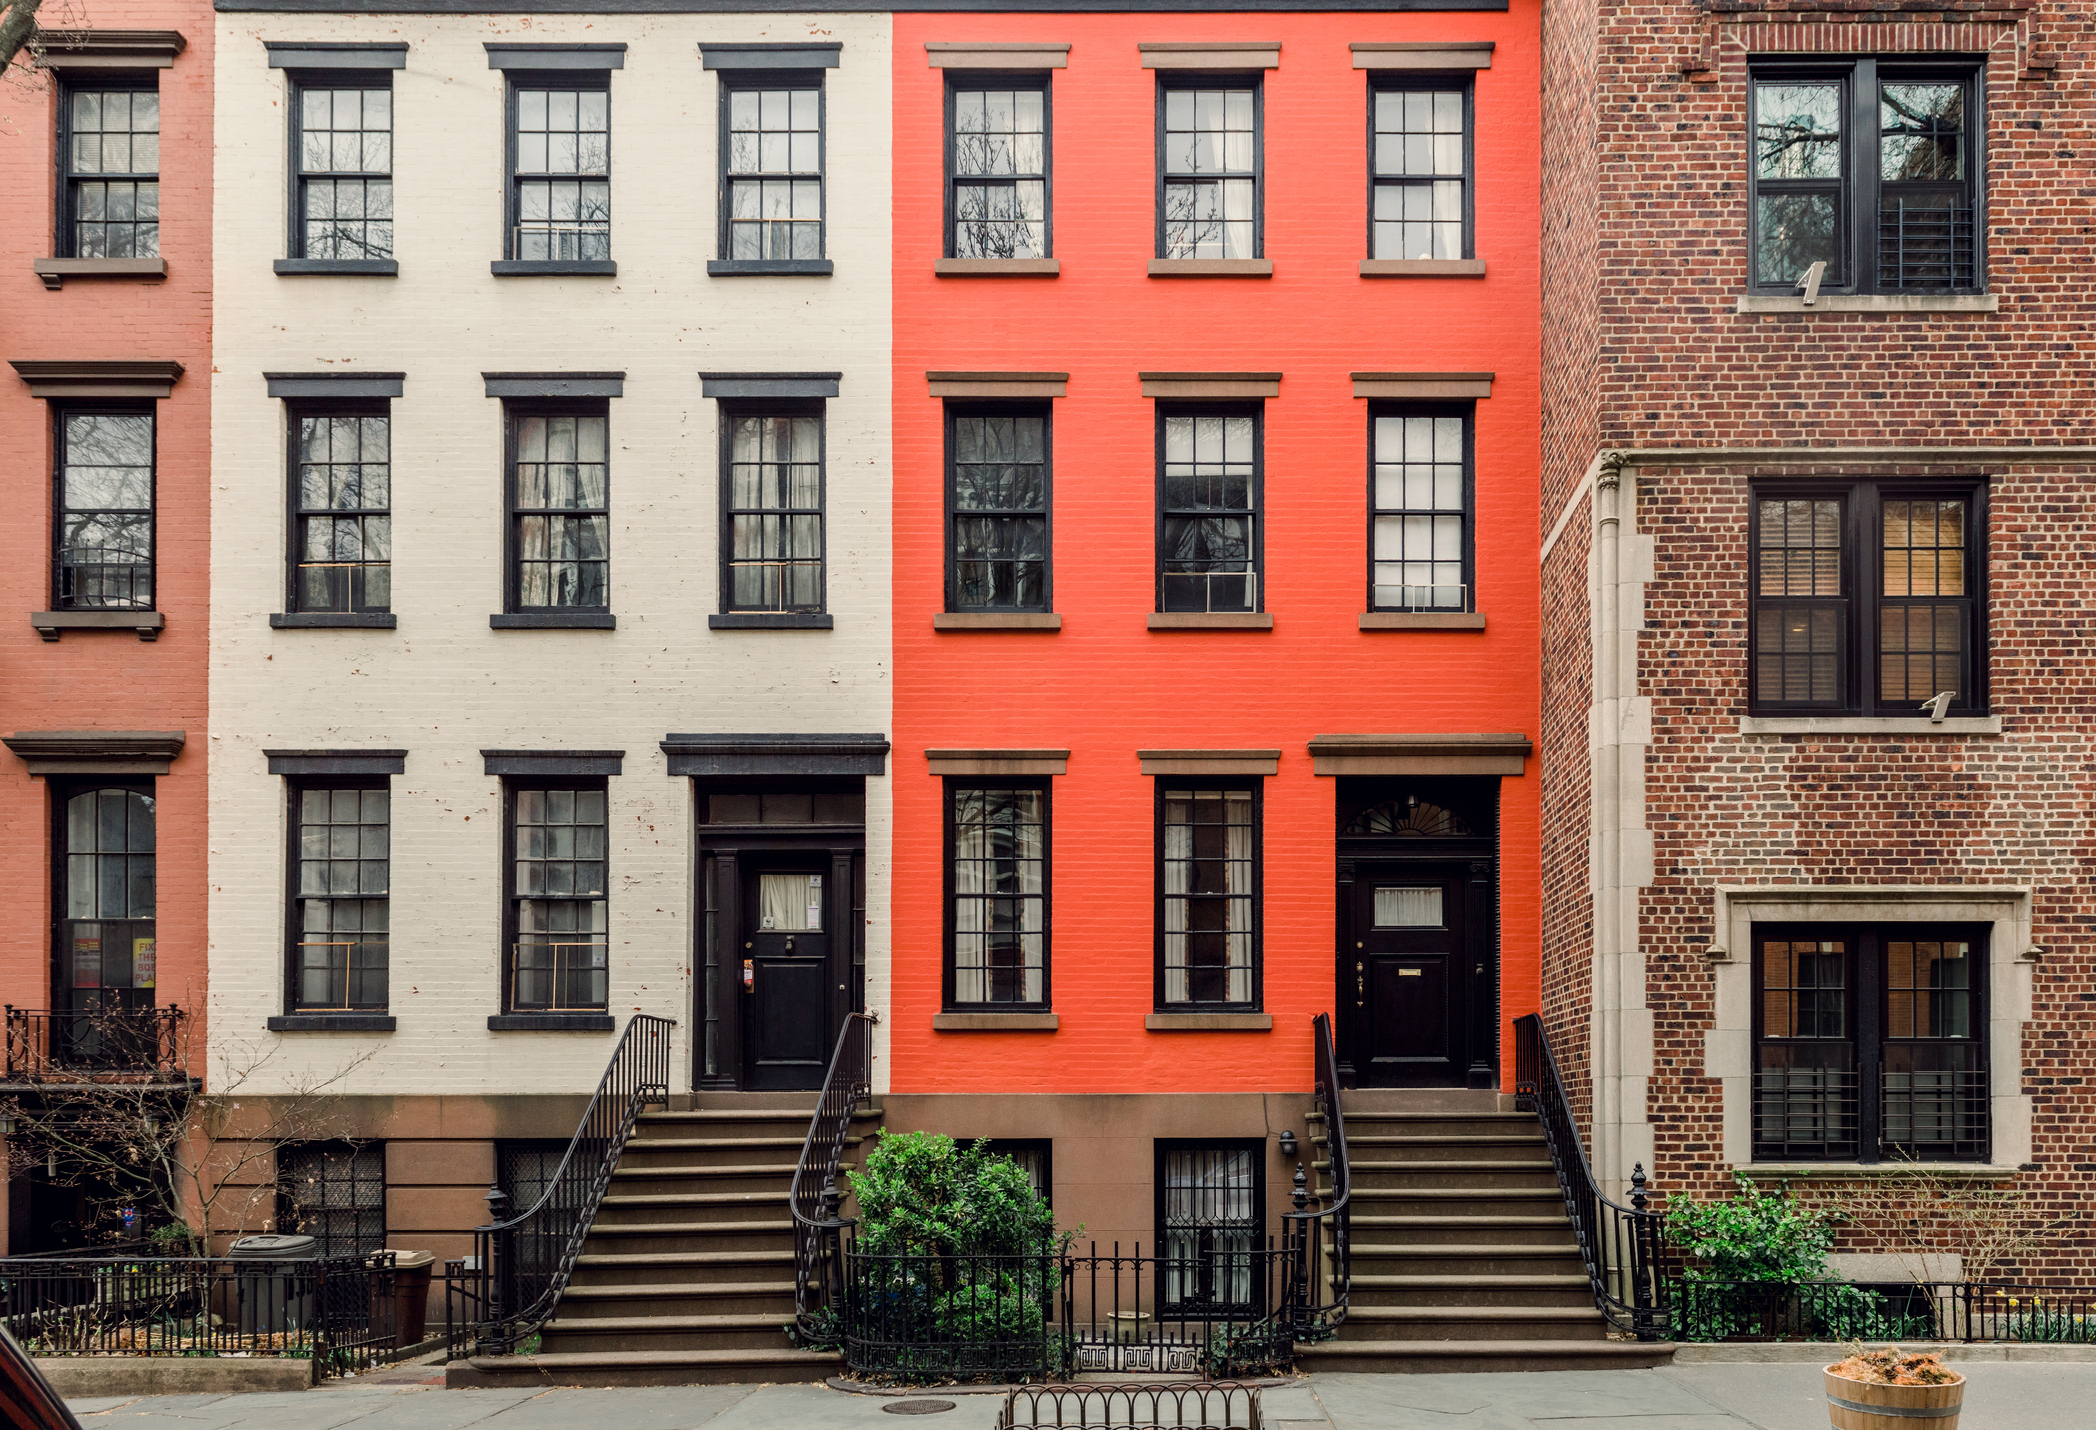 Condos vs. townhouses: Prices, carrying 